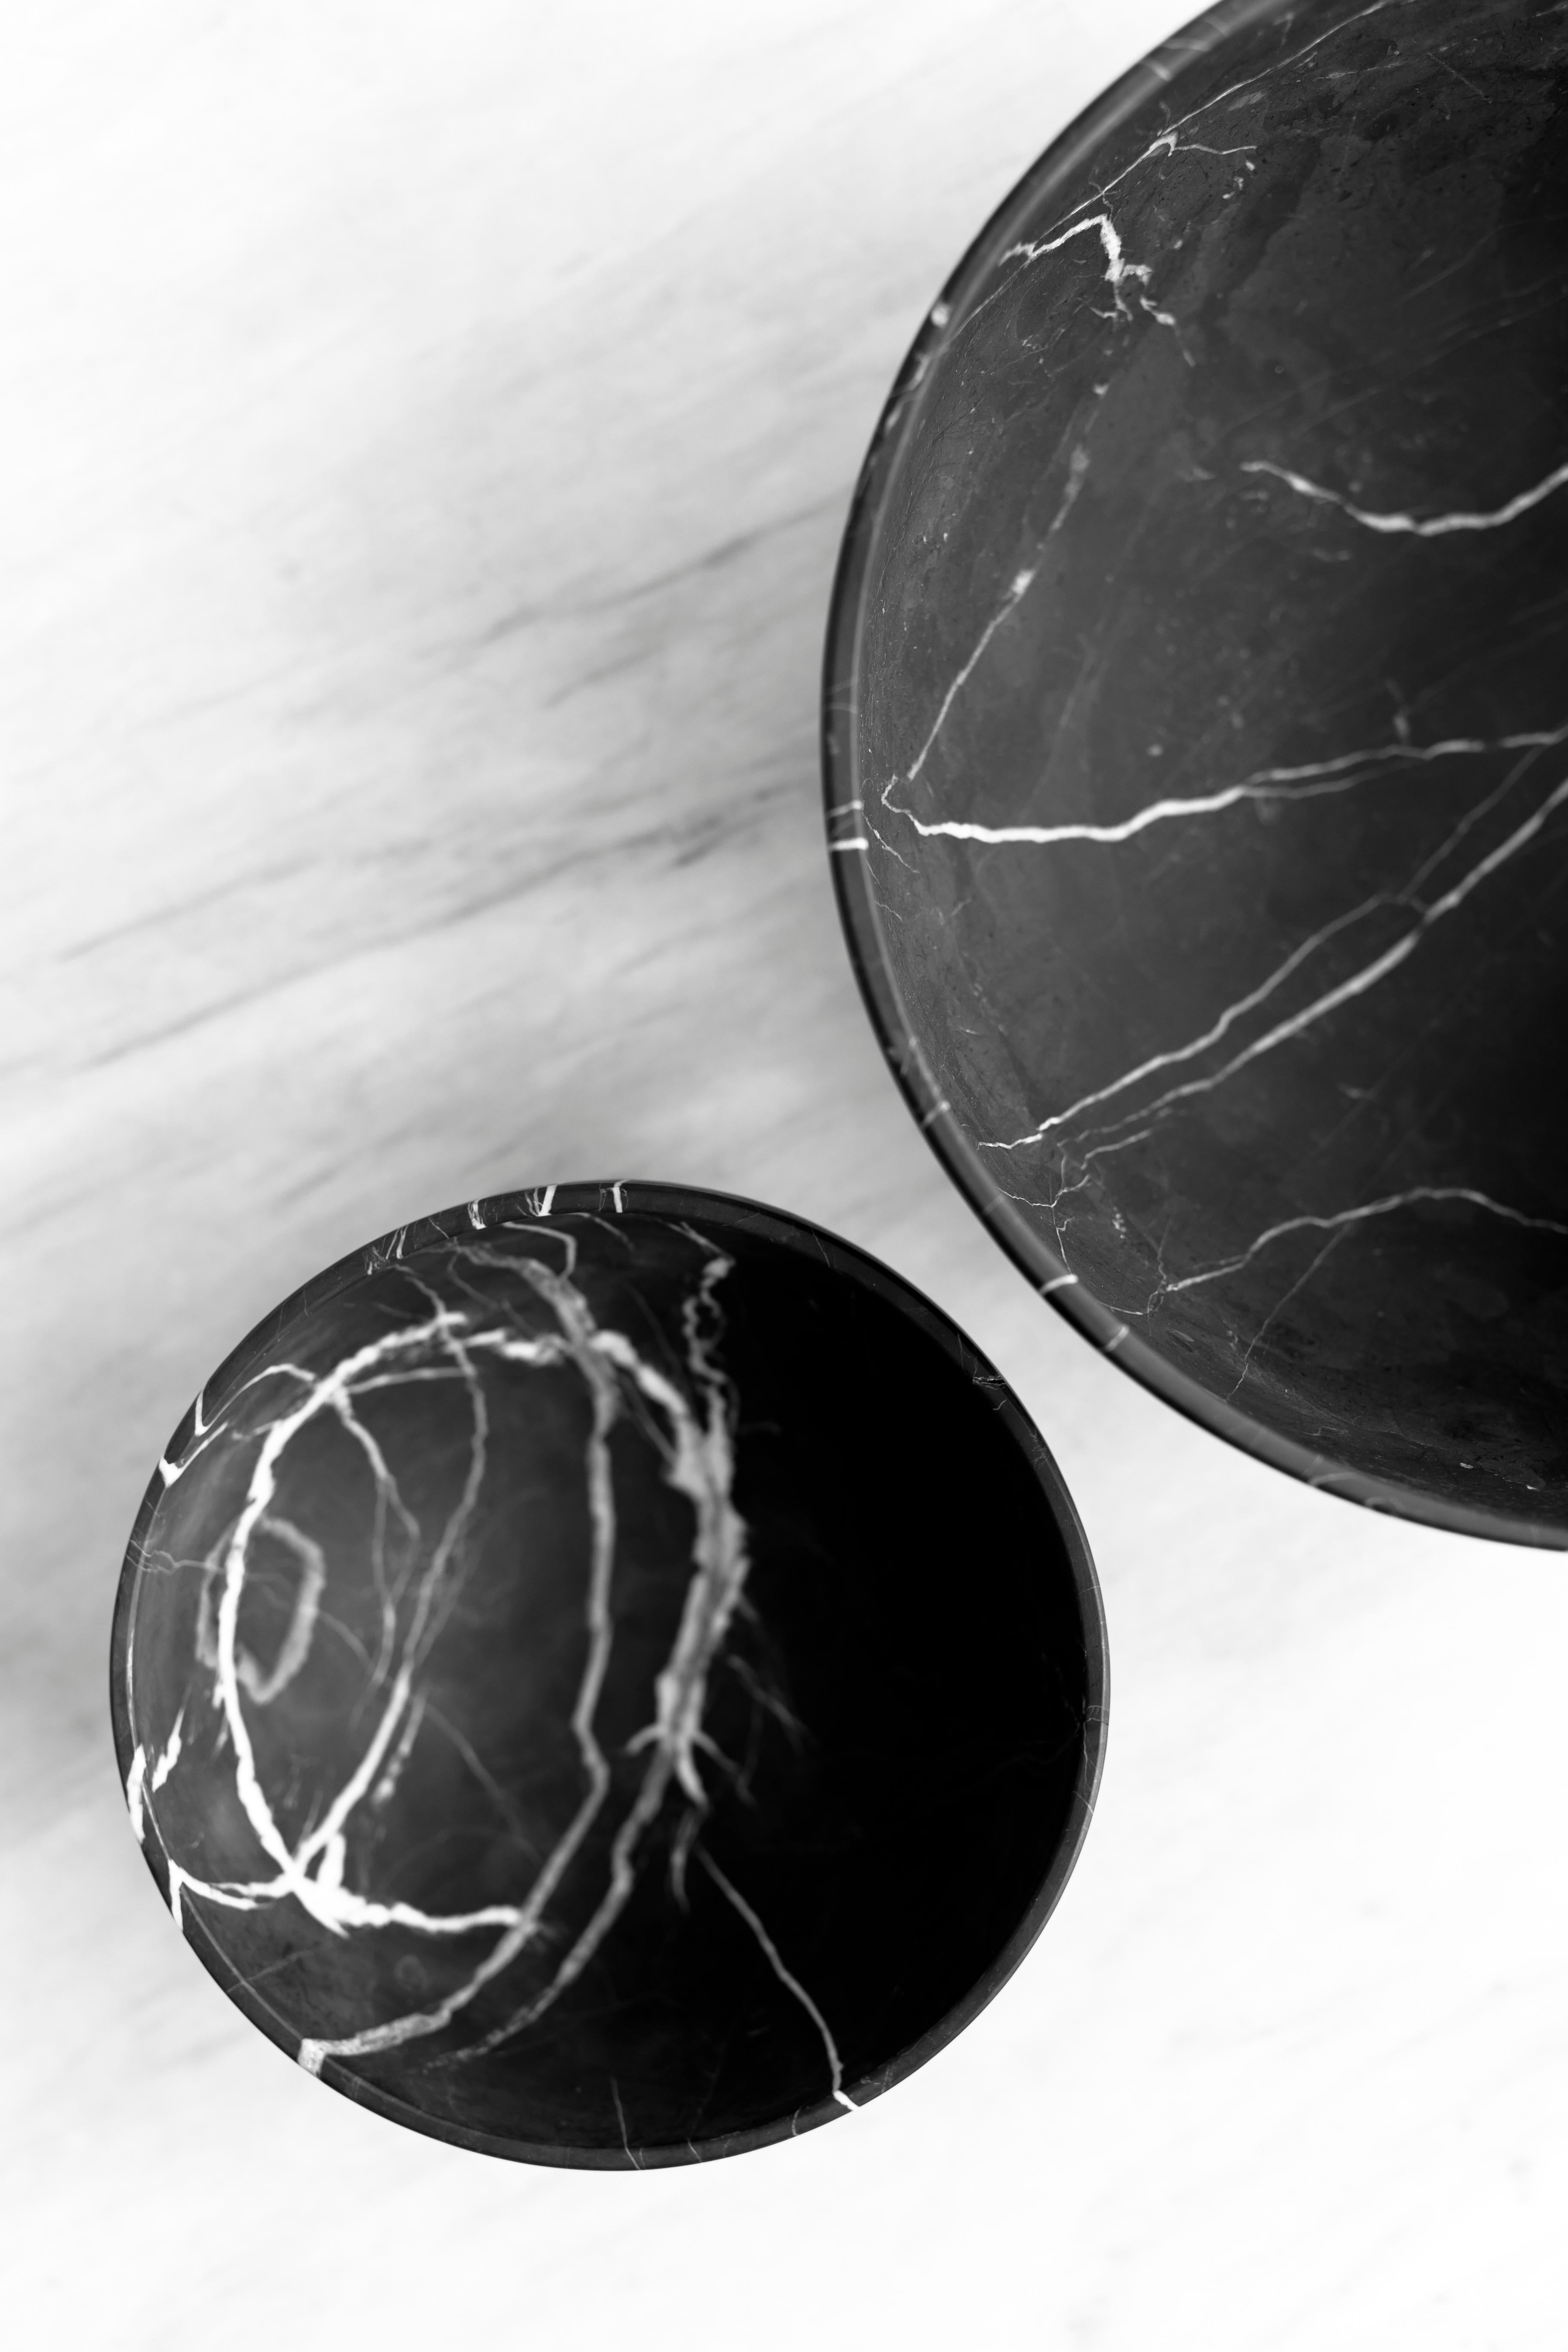 Small bowl in carved Monterrey black marble. Handmade in MÃ©xico by local craftsmen.  Production time: 6-8 weeks for items without marble / 13-14 weeks for marble pieces. Shipping +10 additional business days. Casa Quieta uses natural materials such